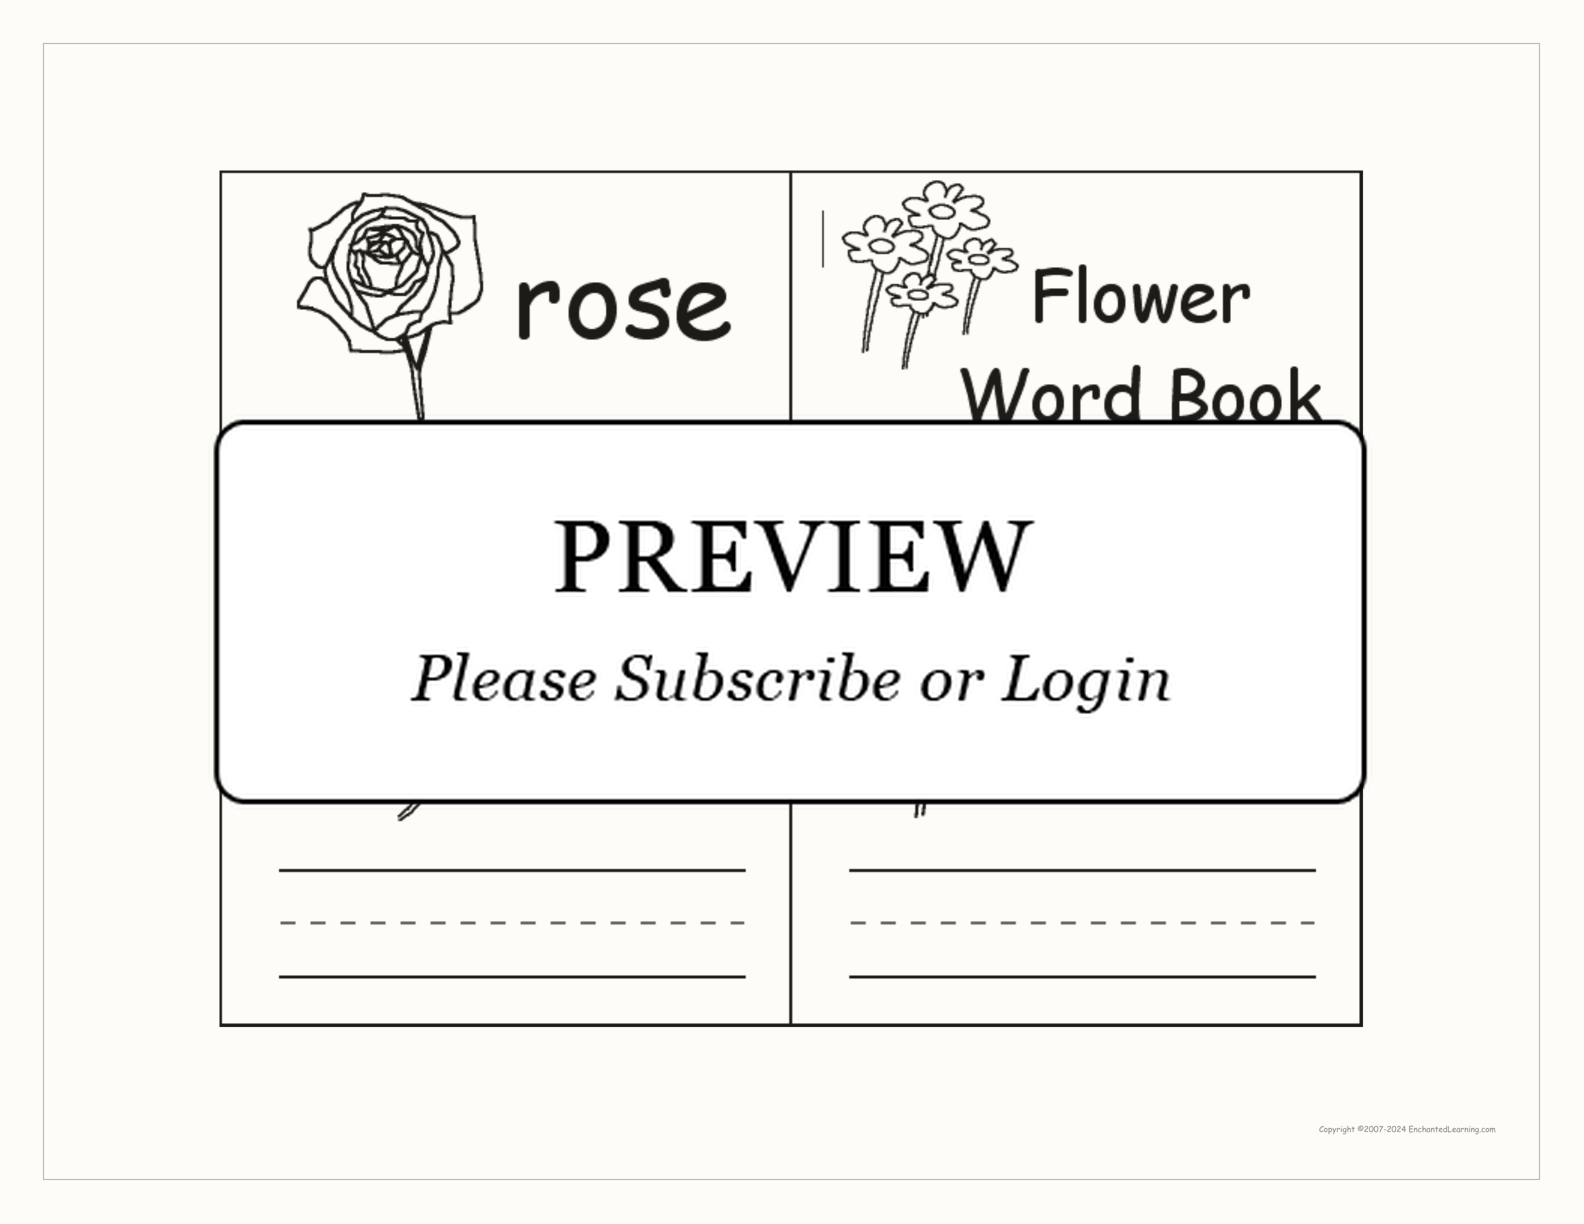 Flower Word Book interactive printout page 1